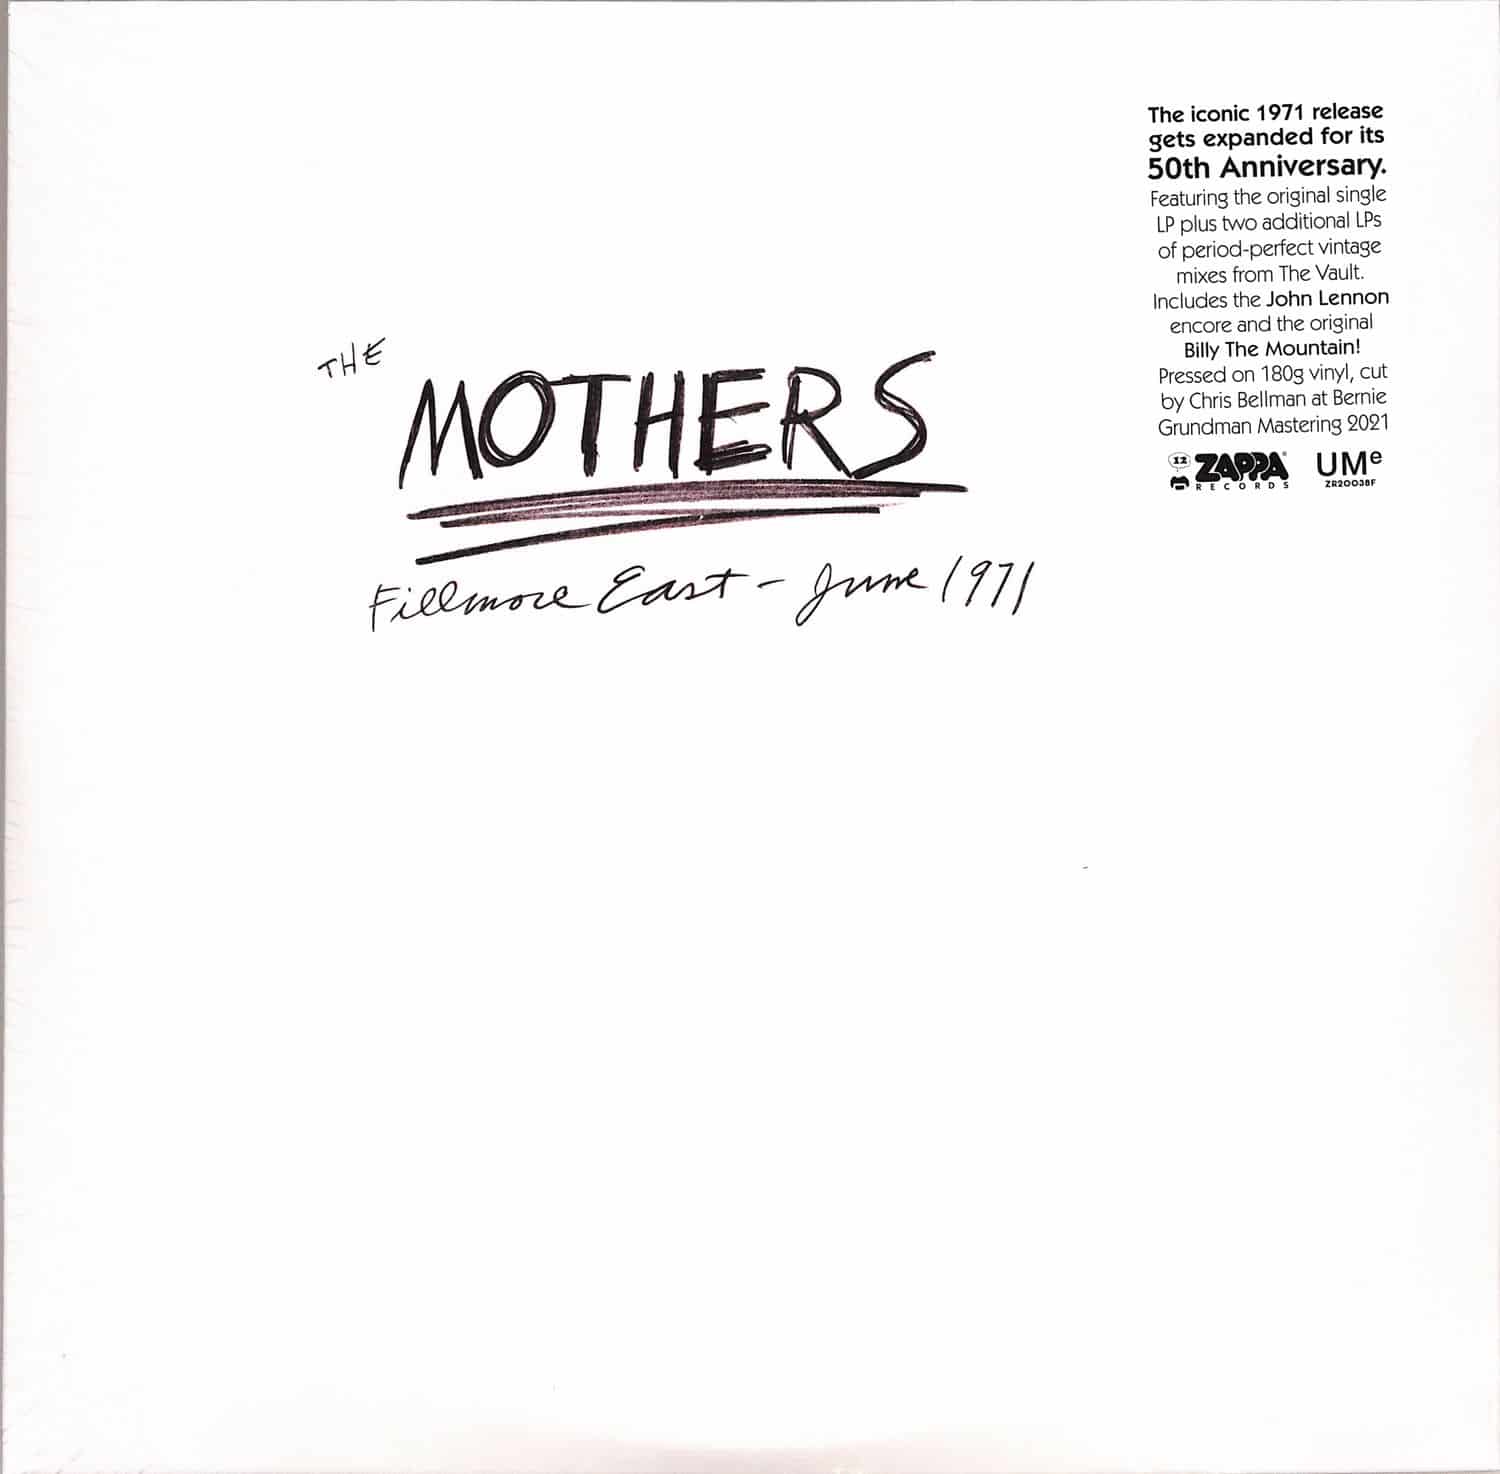 Frank Zappa & The Mothers - THE MOTHERS 1971 FILLMORE EAST 